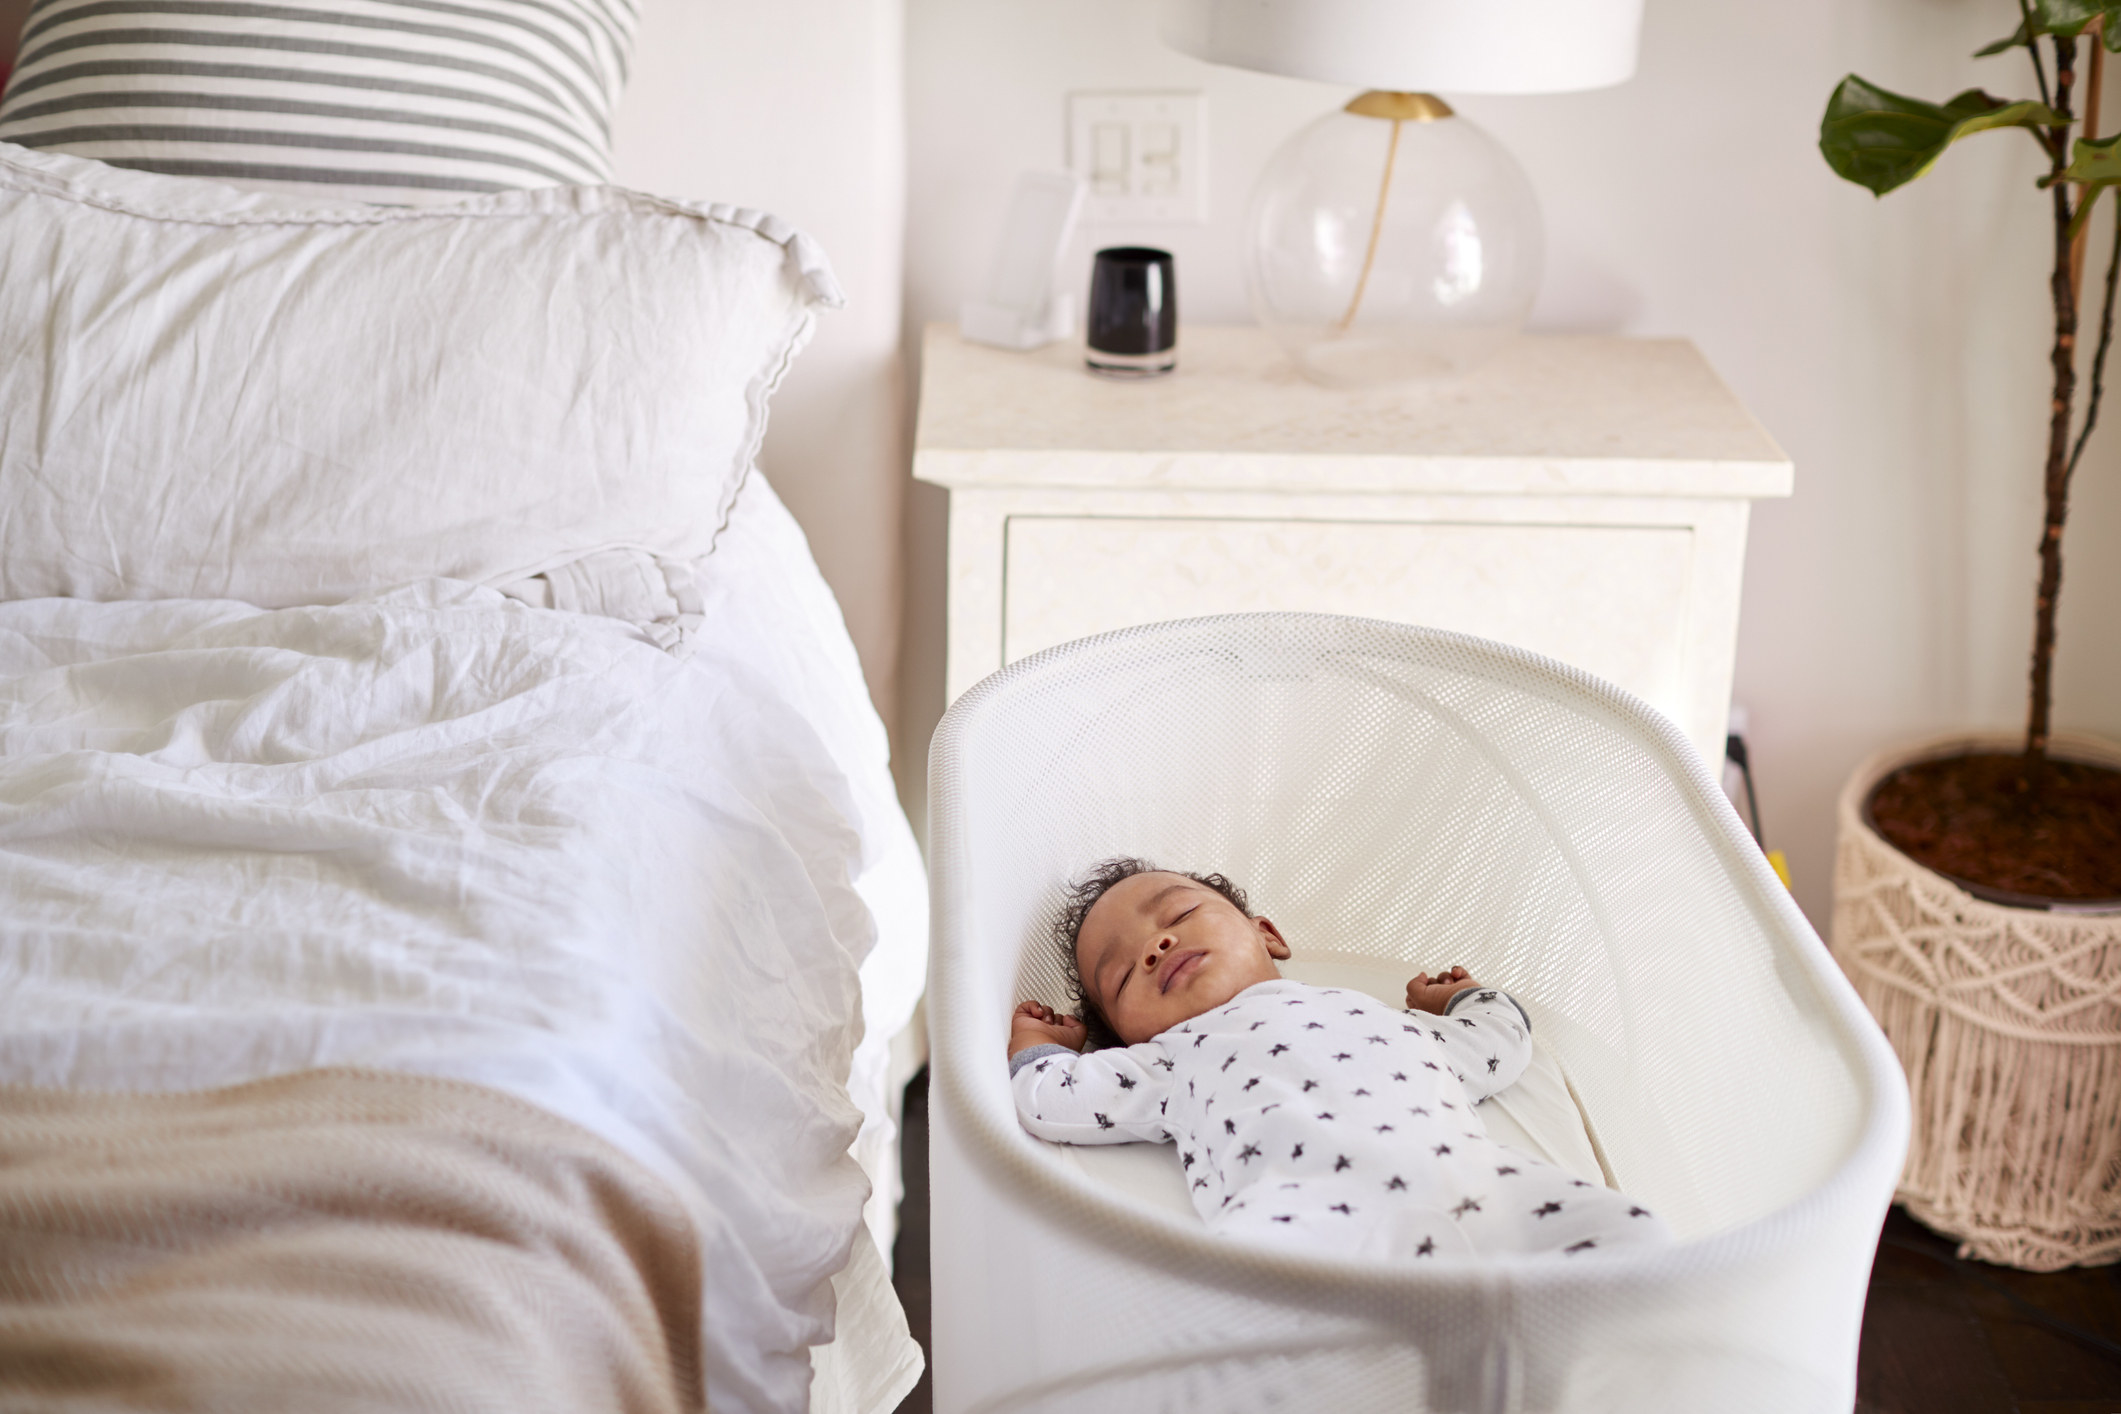 A baby sleeping in a bassinet.